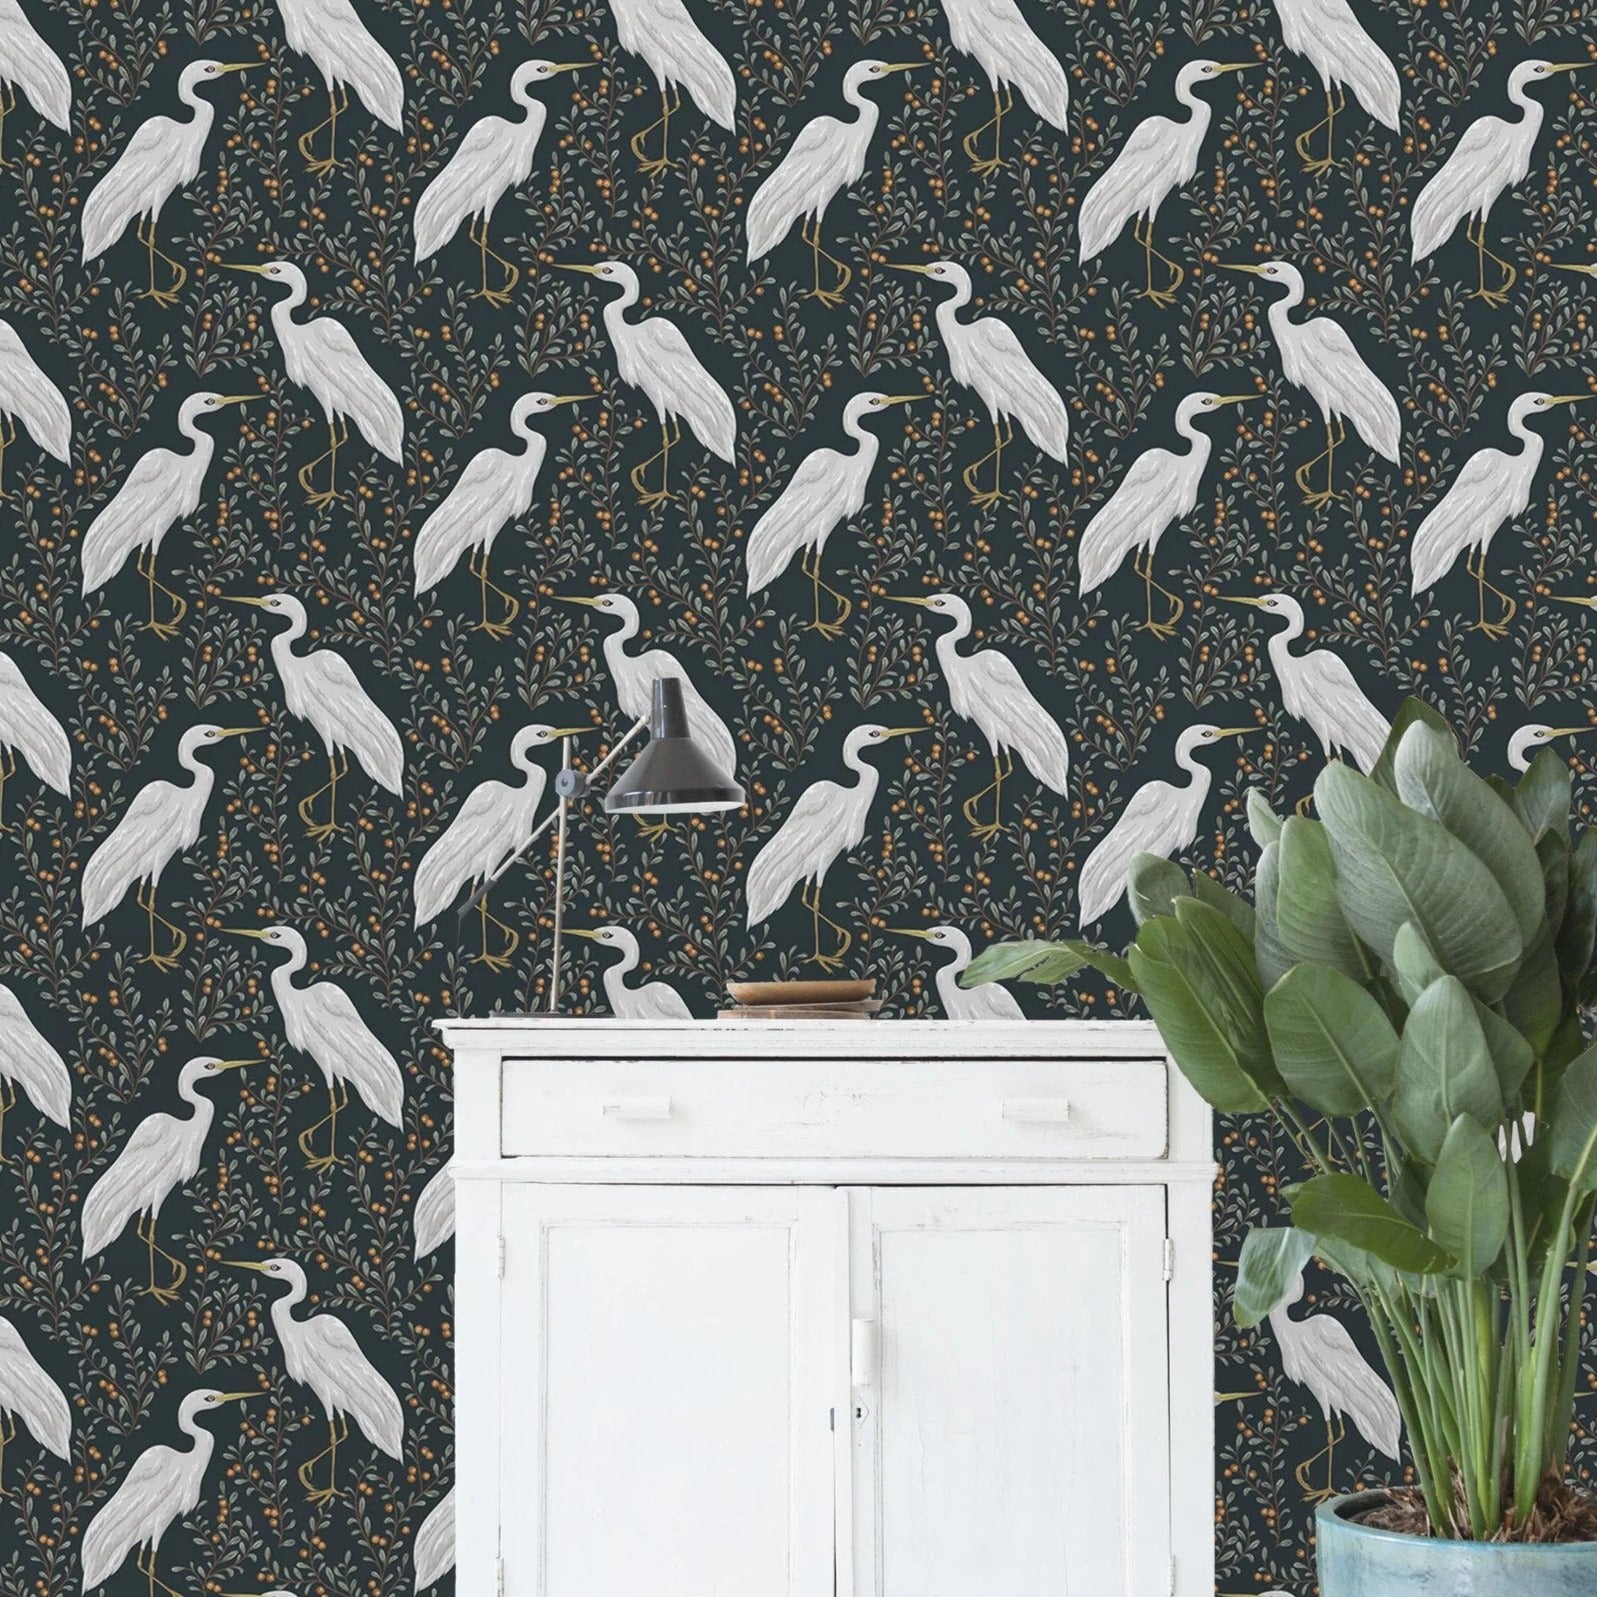 This JawDropping Nursery Has the Prettiest Wallpaper Weve Ever Seen   Camille Styles